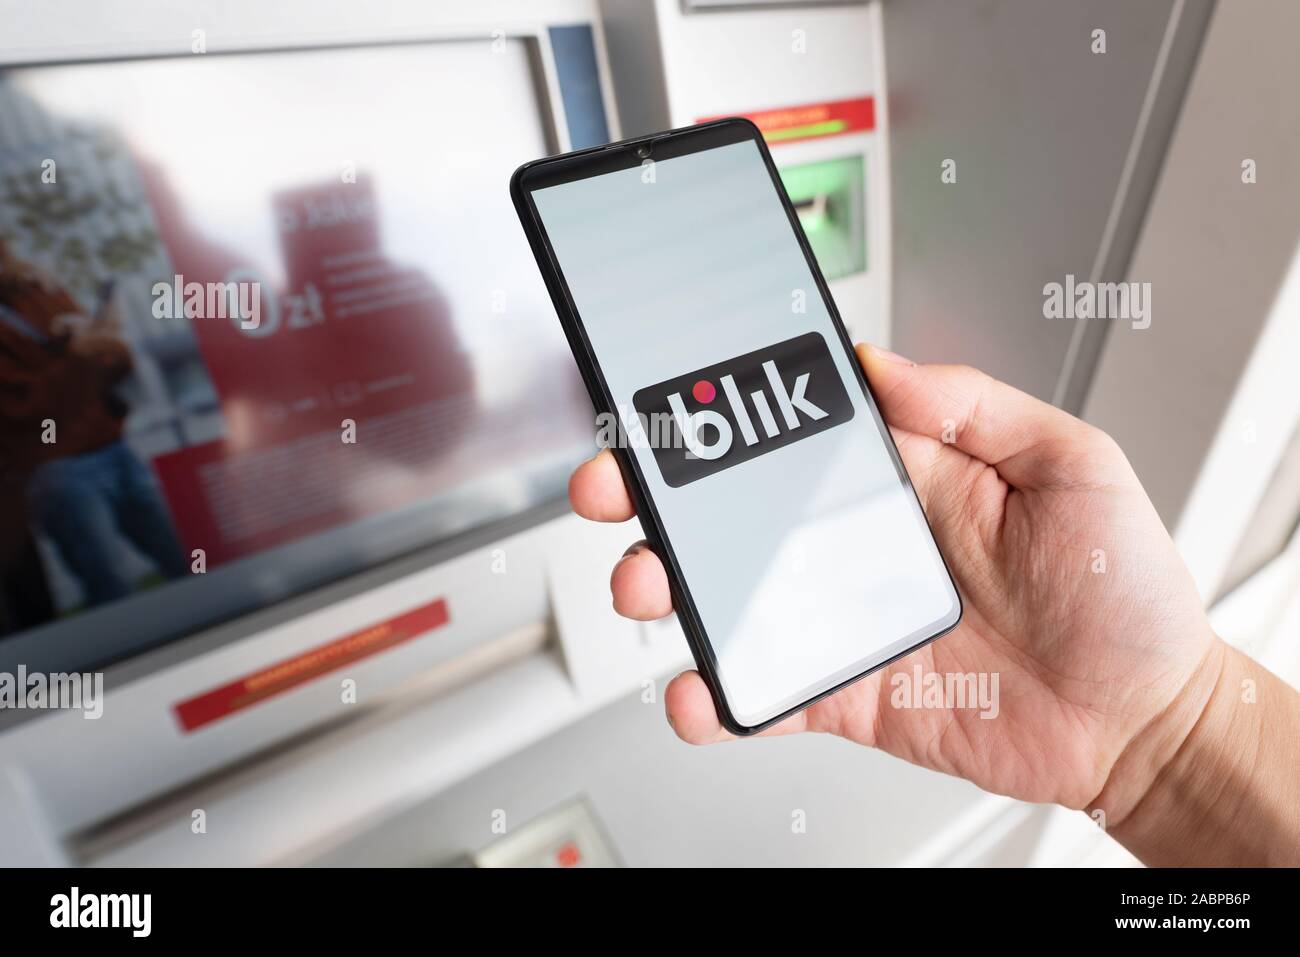 Atm Poland High Resolution Stock Photography and Images - Alamy